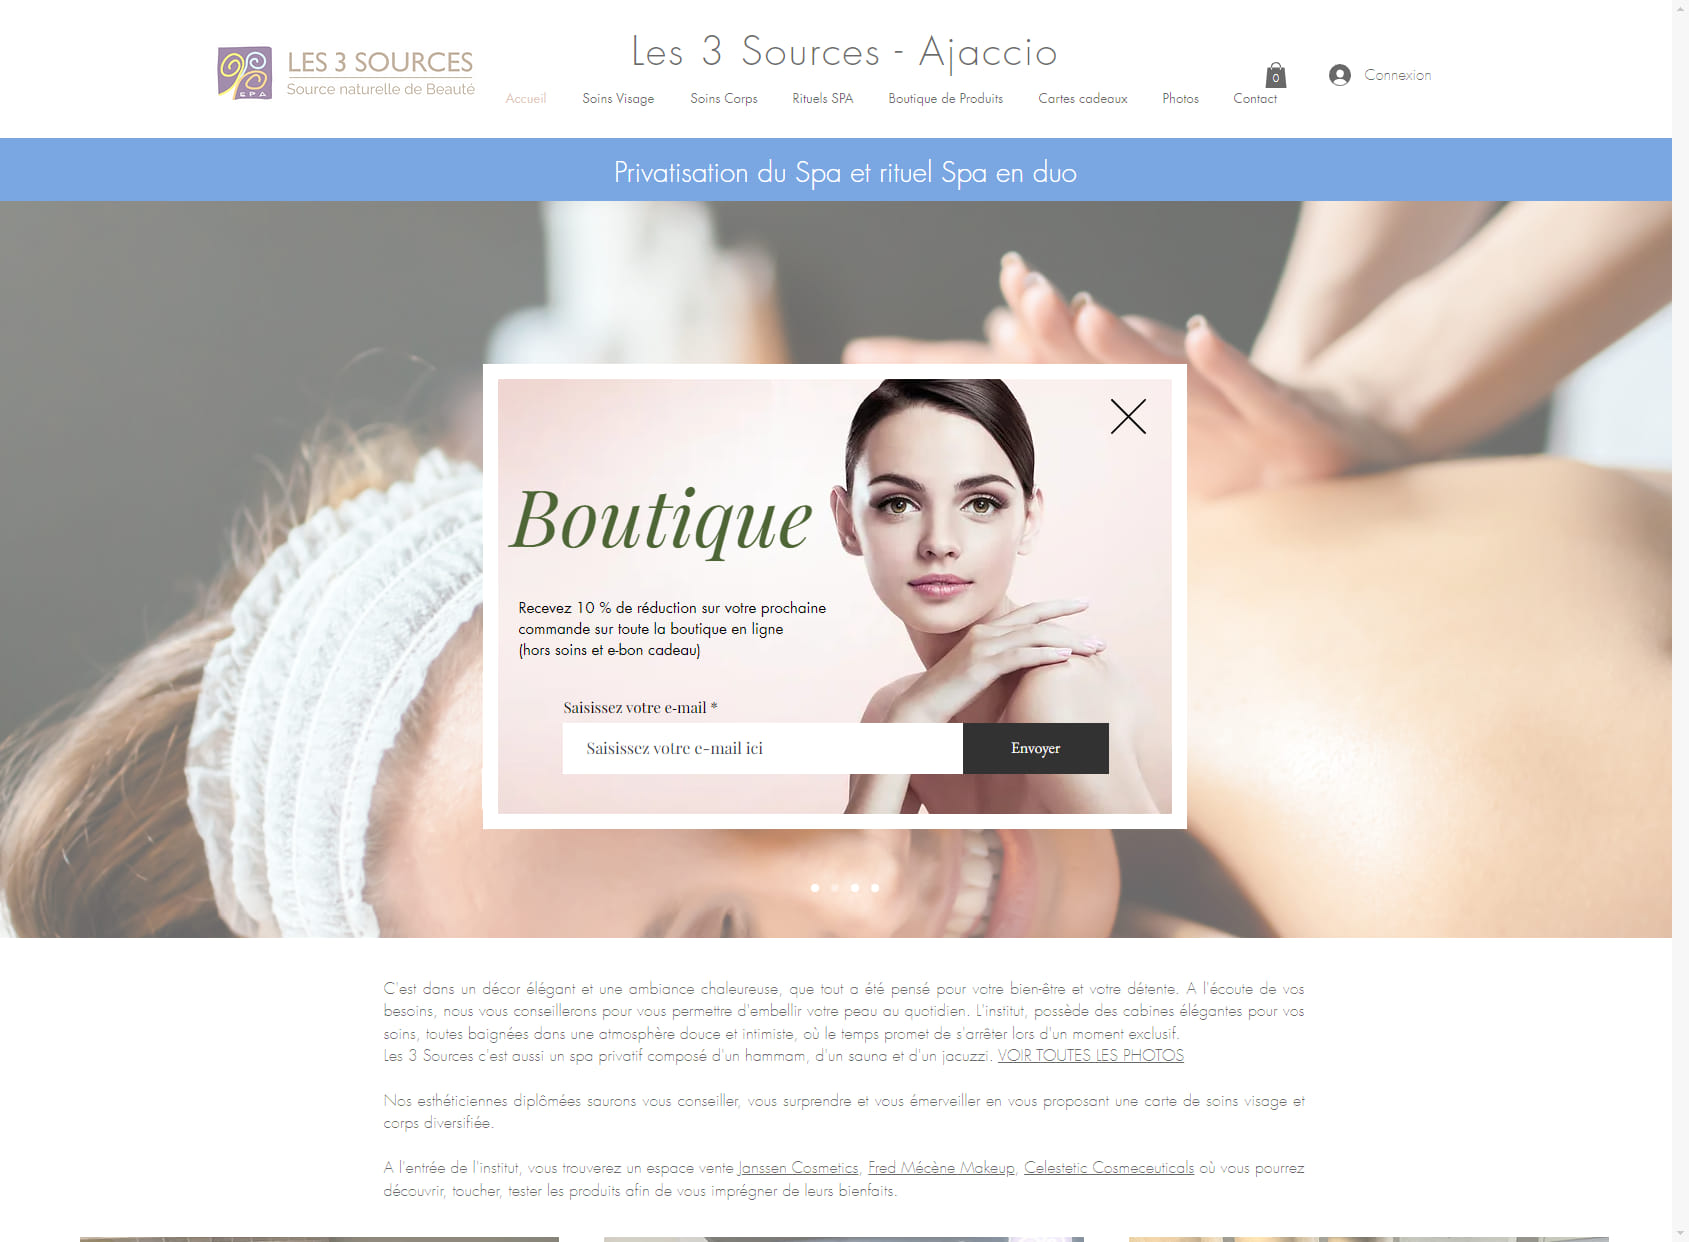 THE 3 SOURCES Spa / Beauty